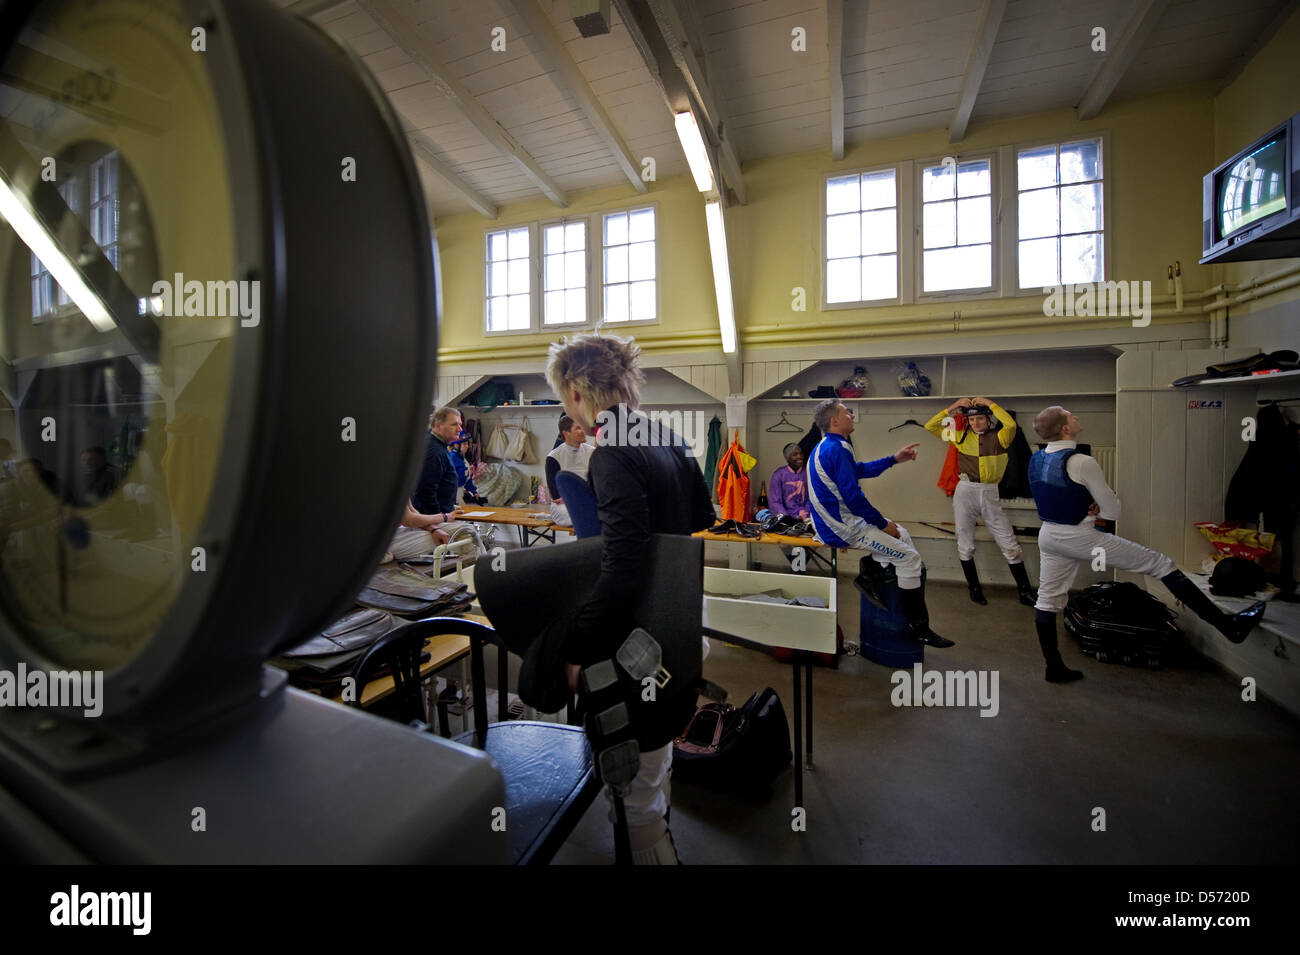 Jockeys wait for their race in the locker room at the horse race track in Hoppegarten, Brandenburg, Germany, 04 April 2010. The 142nd racing season kicked off with seven races over the weekend. Photo: Arno Burgi Stock Photo